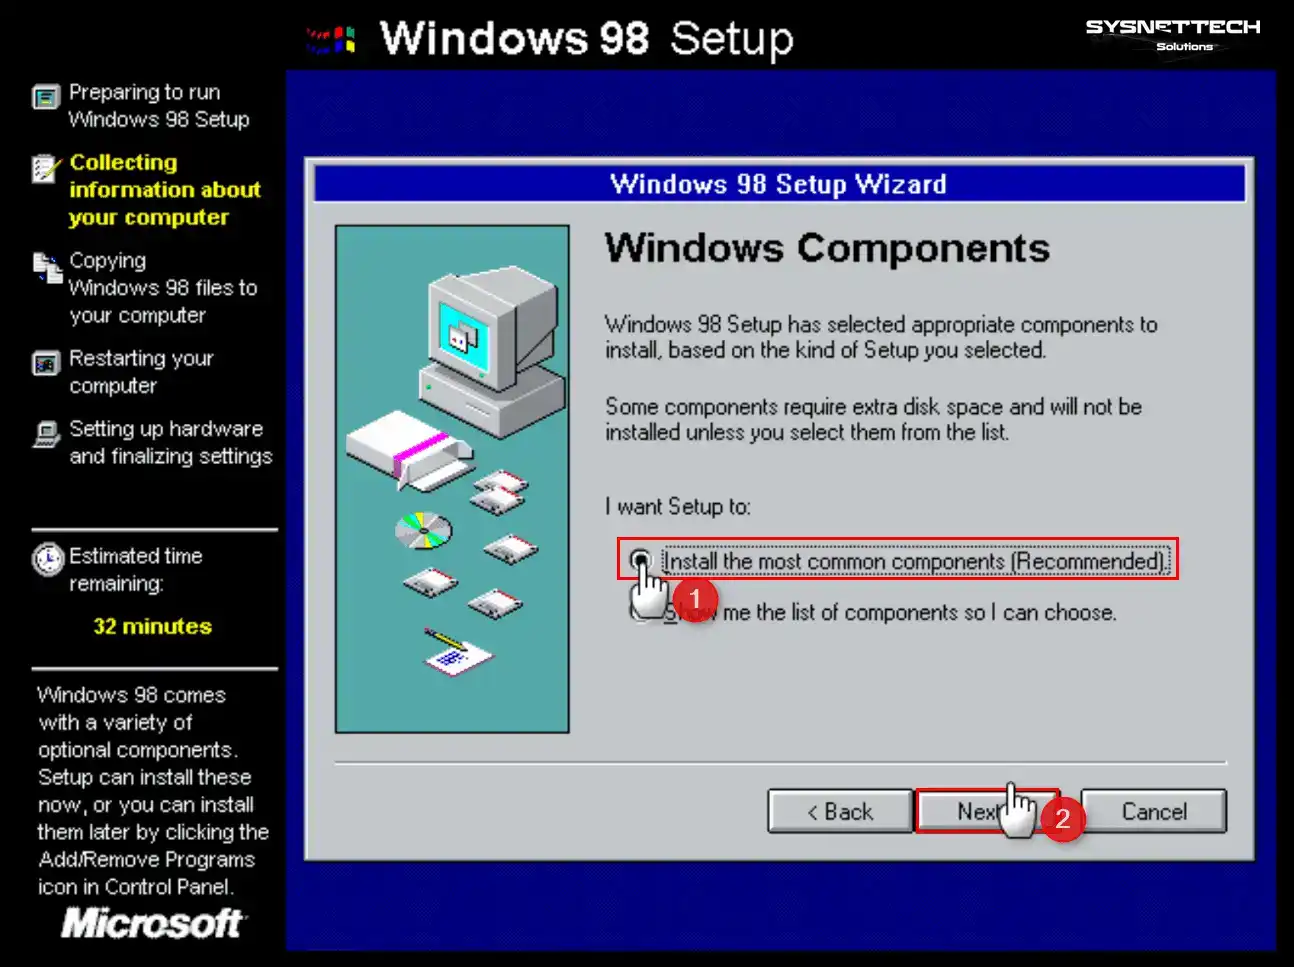 Installing the Most Common Windows Components